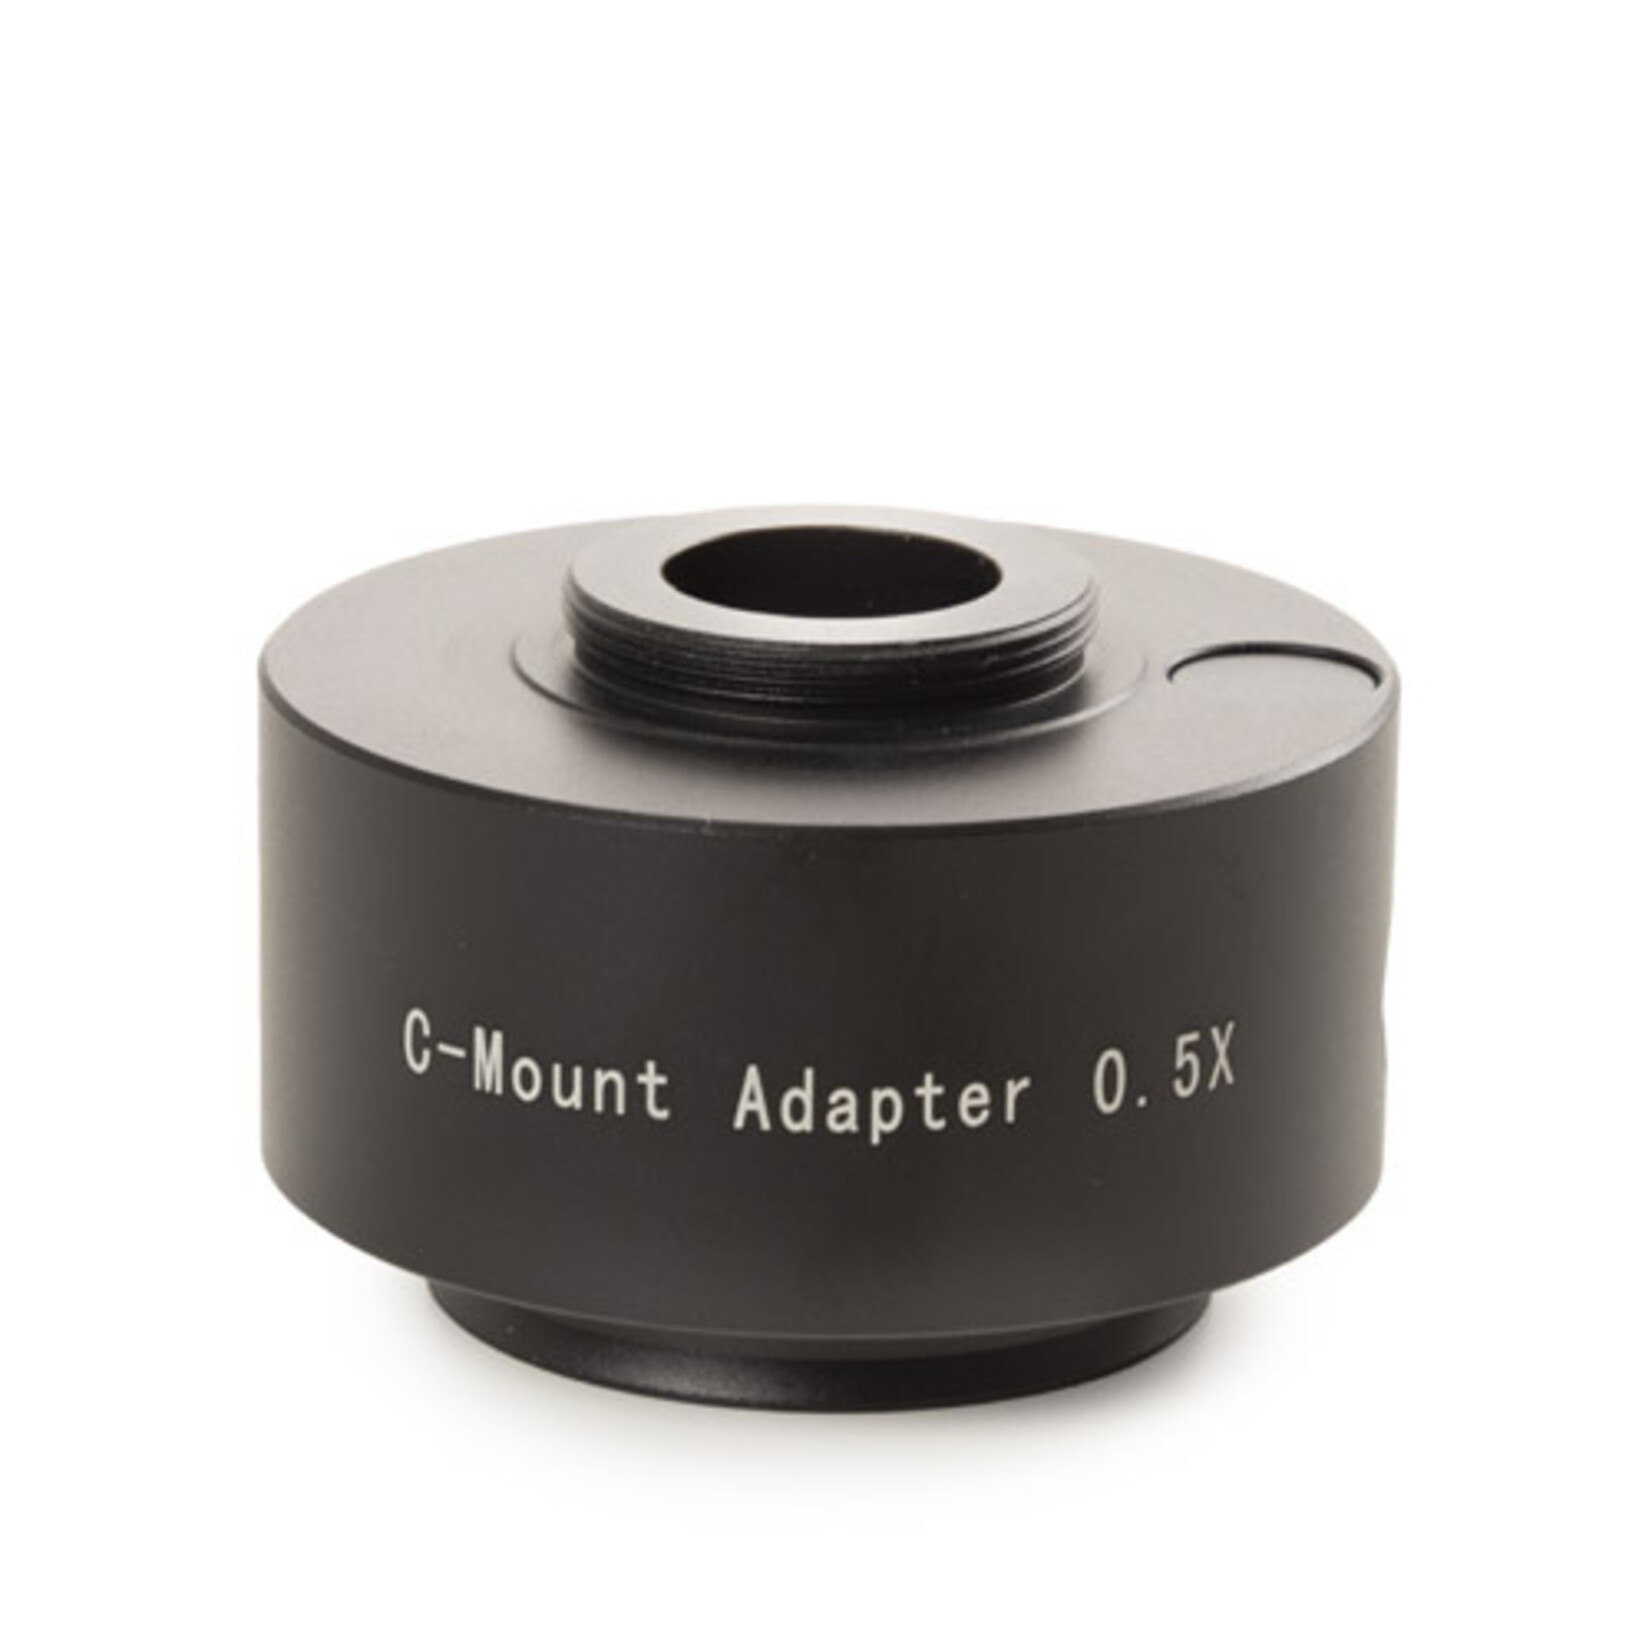 C-Mount adapter for mounting a USB or HDMI camera